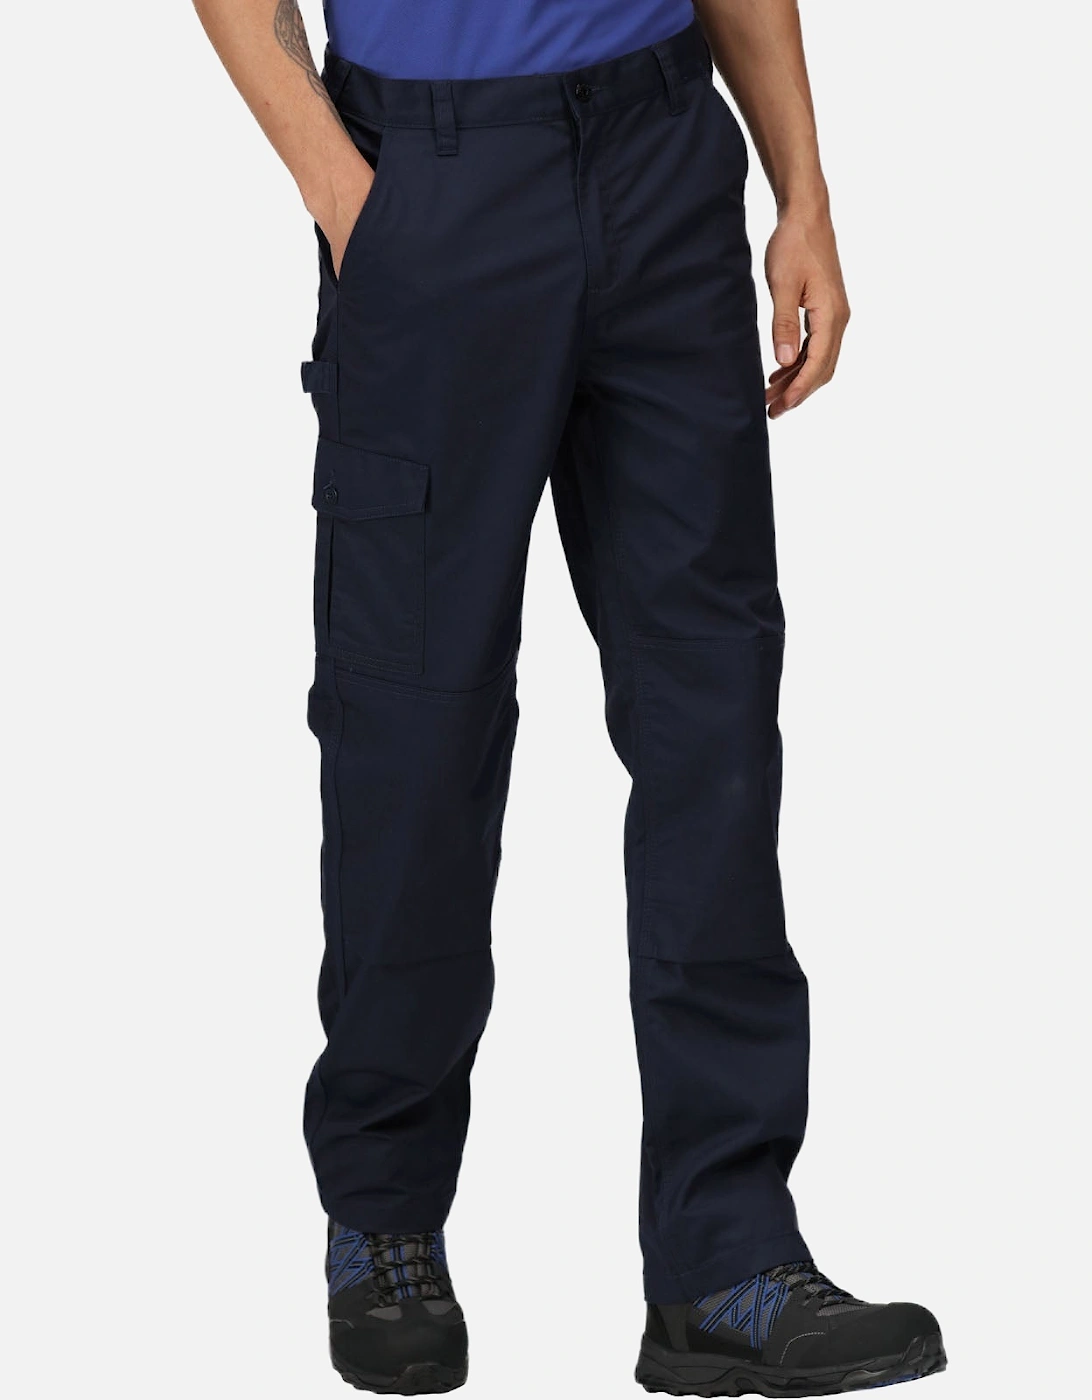 Professional Mens Pro CargoWorkwear Trousers